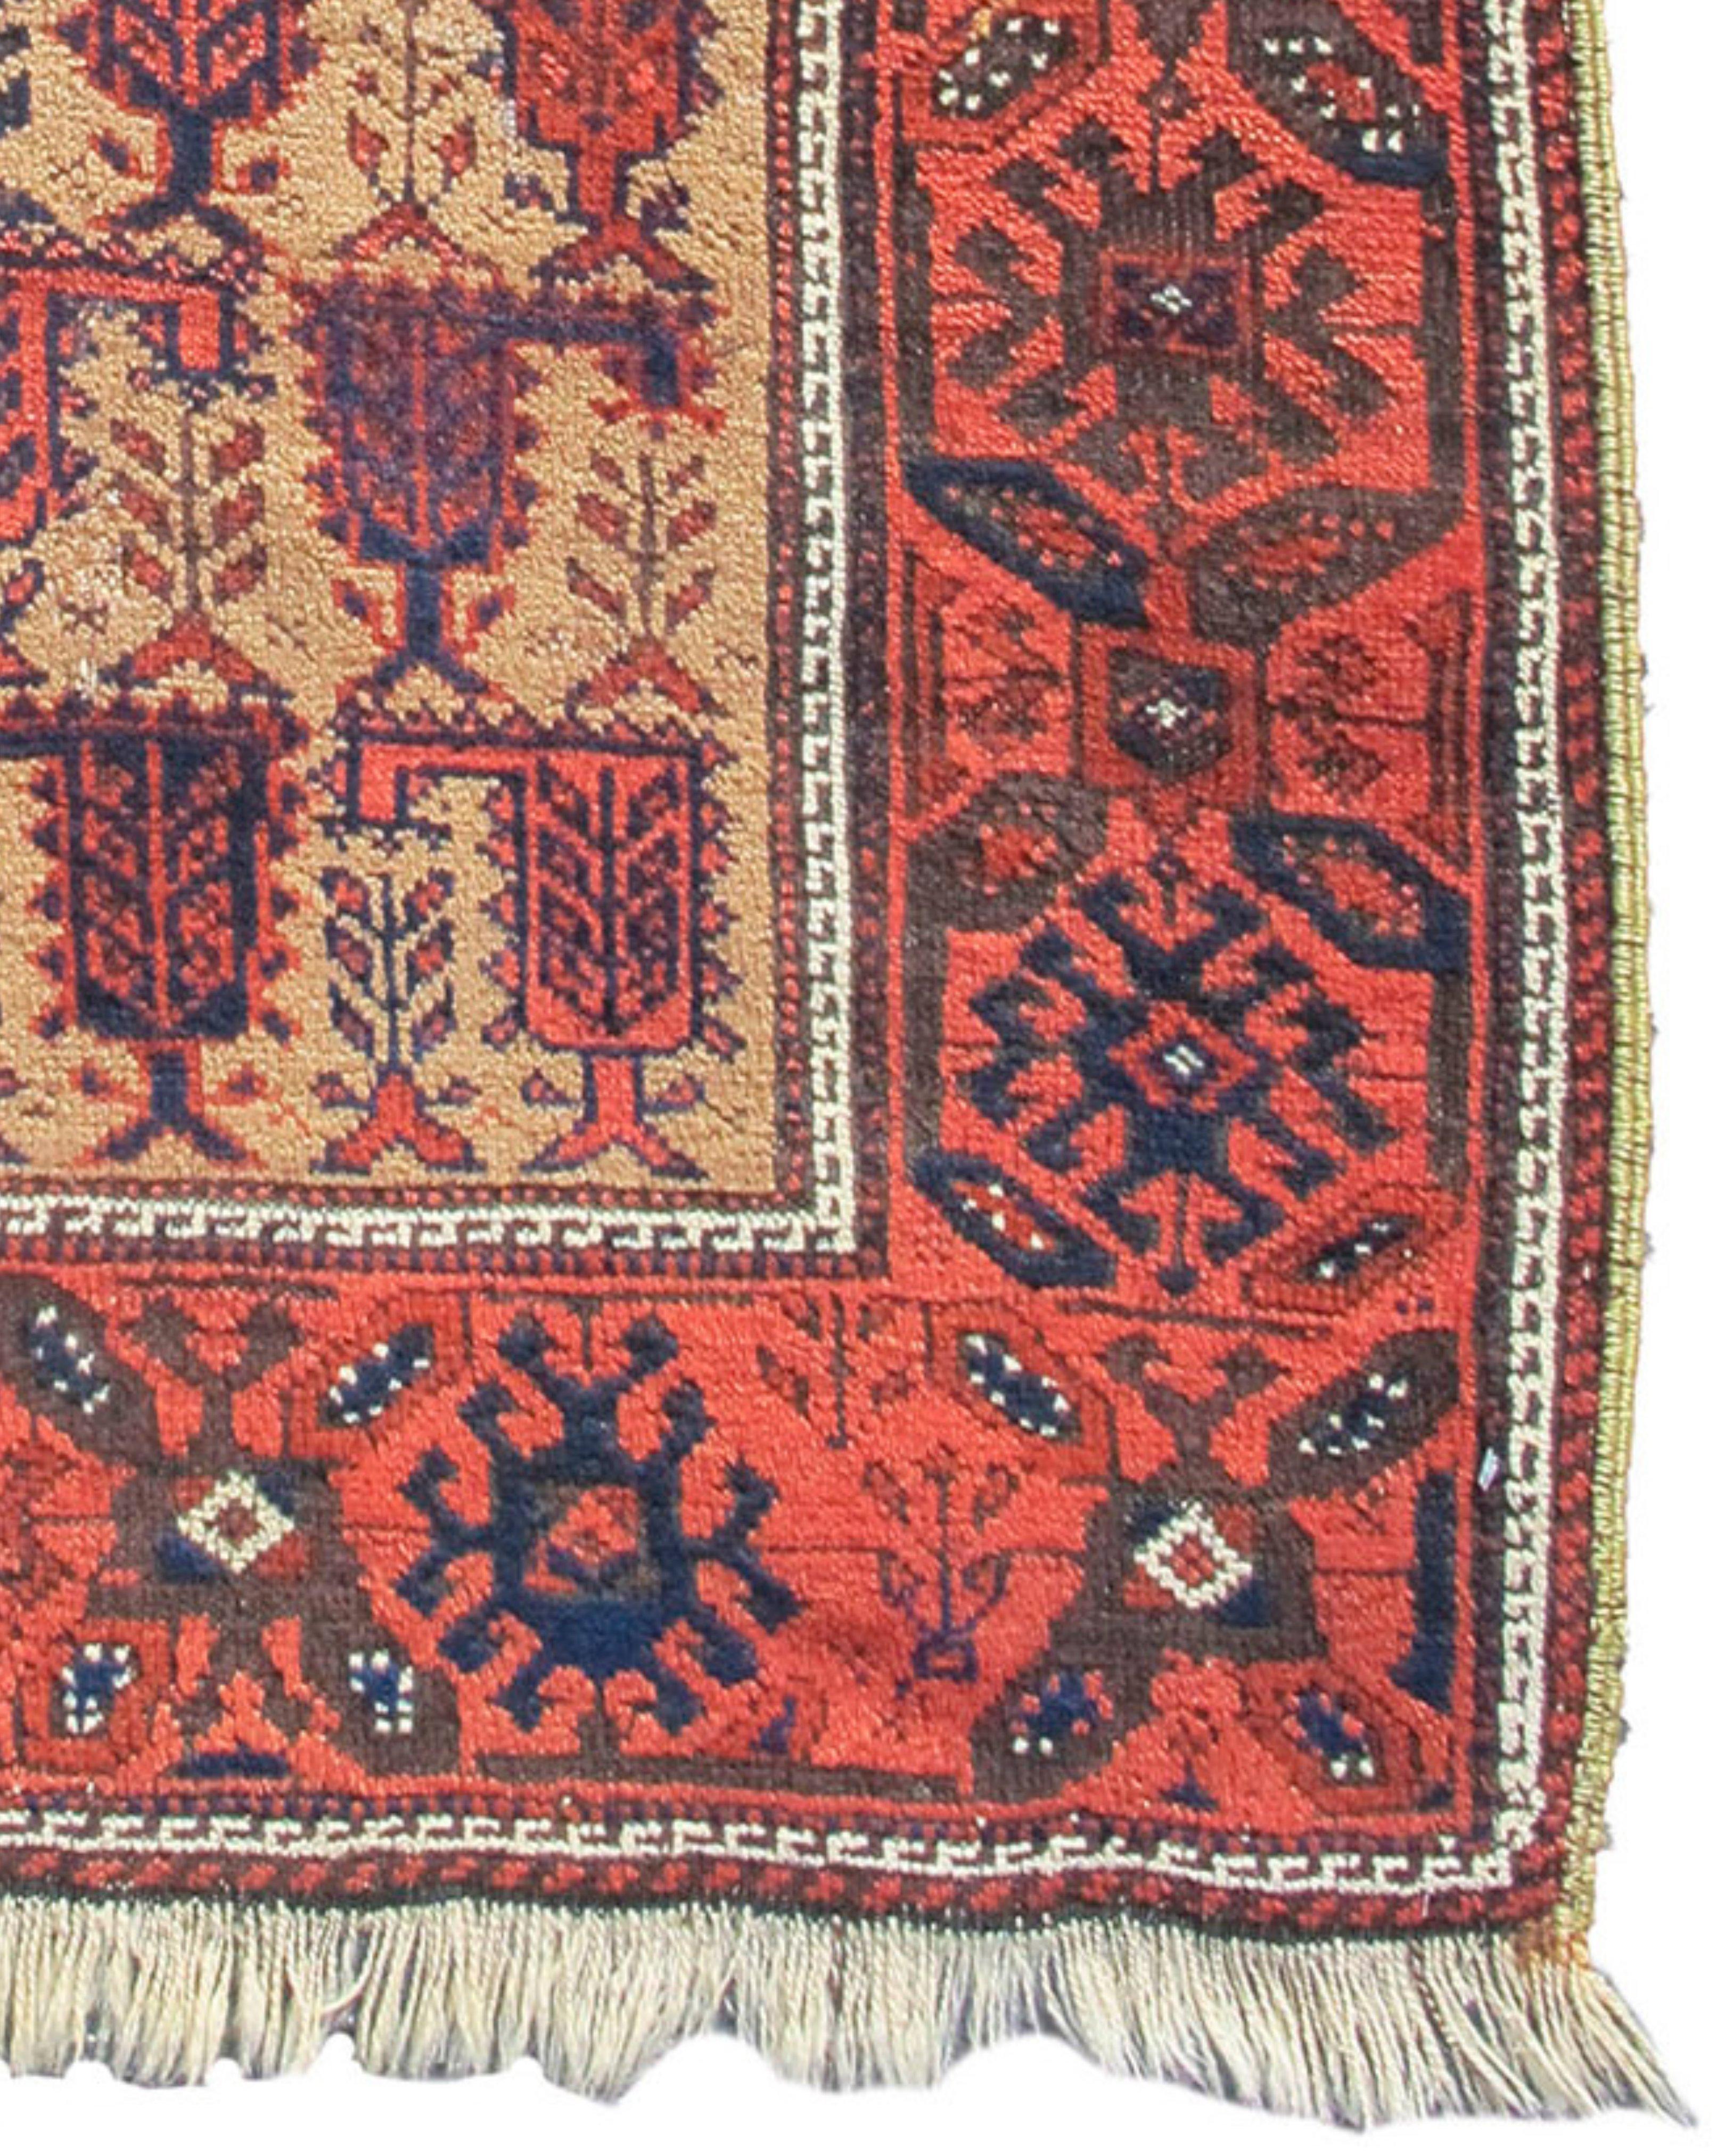 Wool Antique Persian Baluch Rug, Late 19th Century For Sale